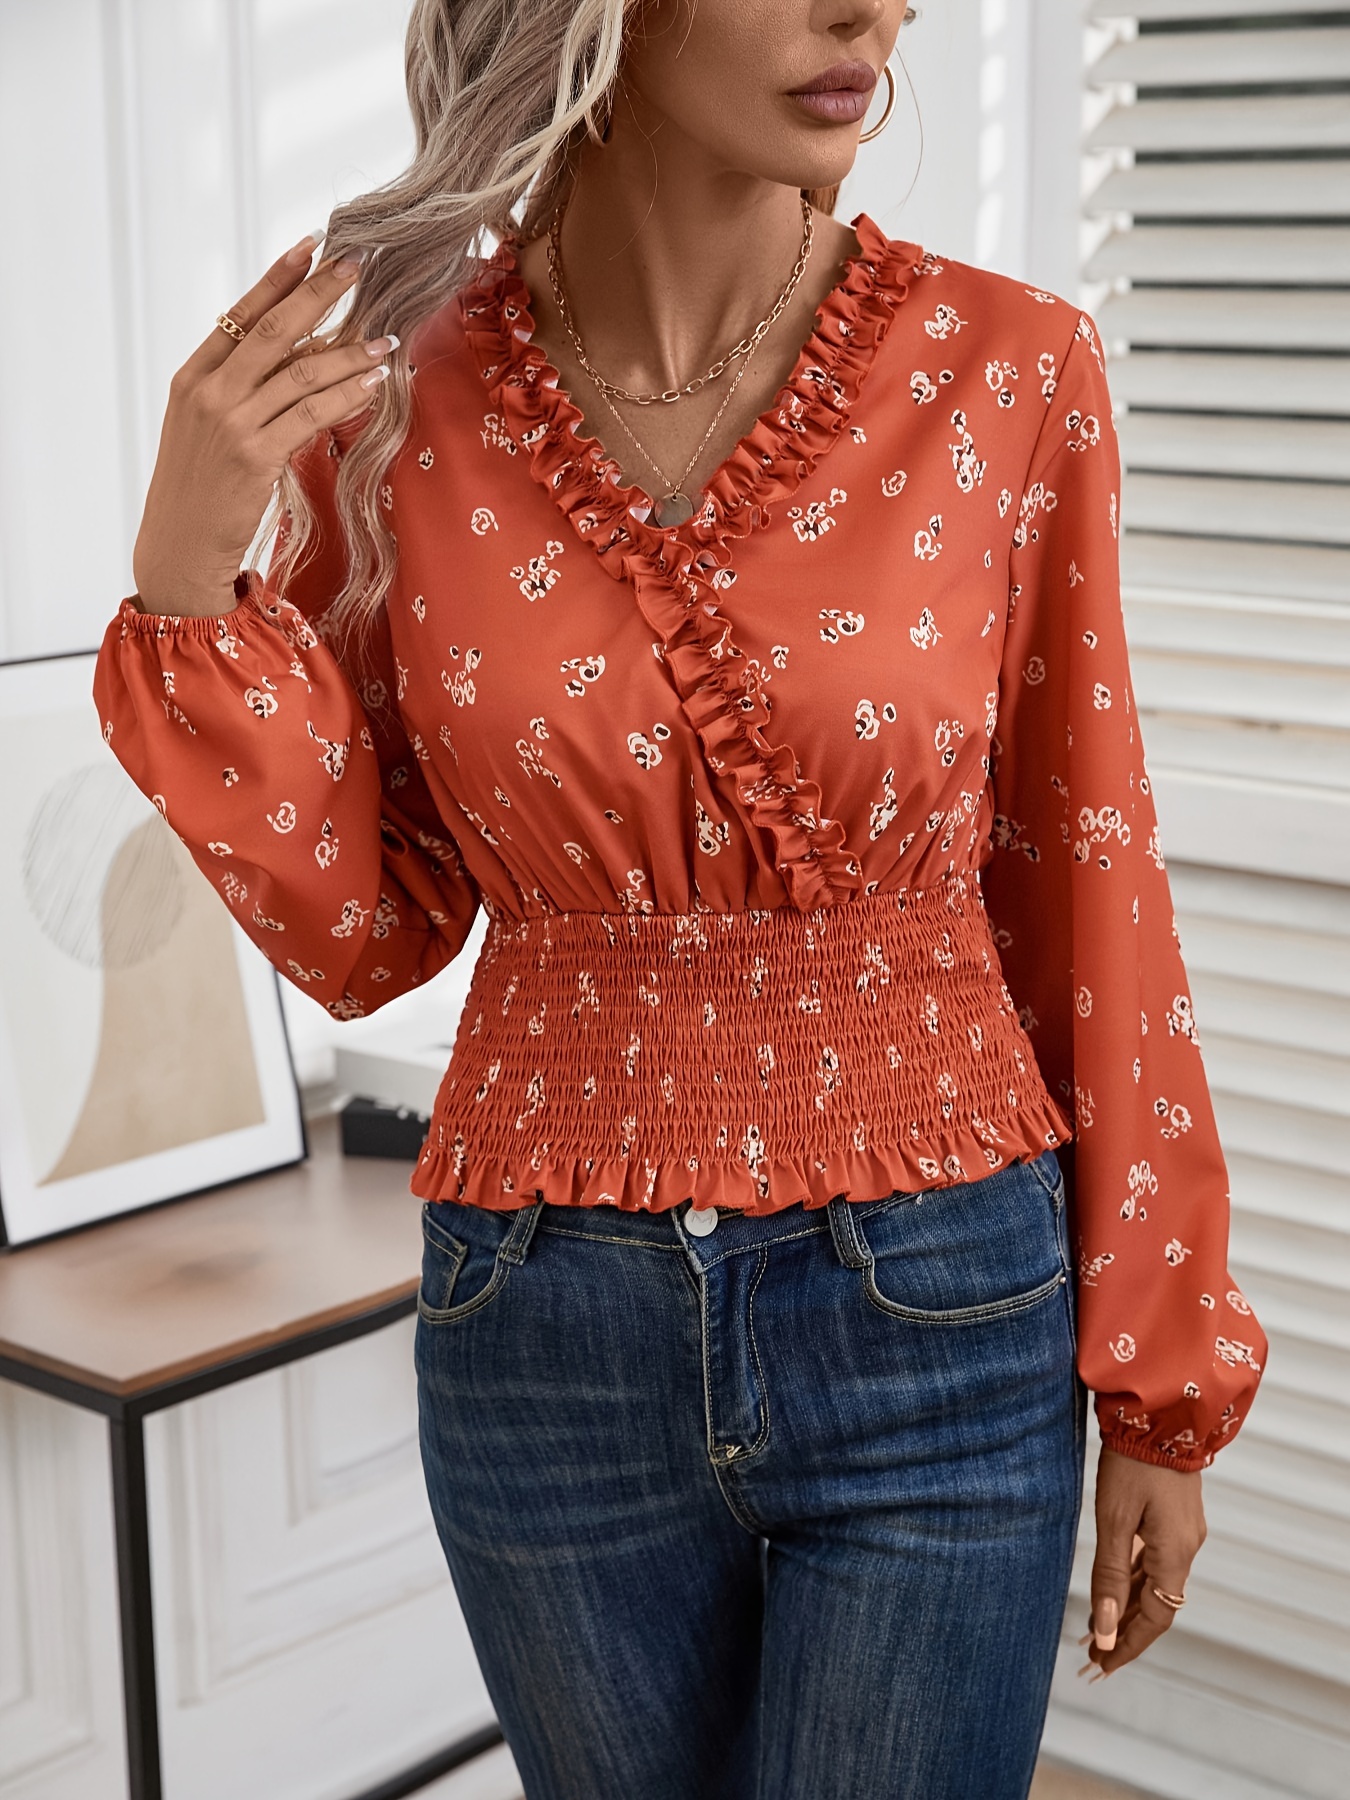 Ladies Floral Print Lantern Sleeve Blouse, V-Neck Long Sleeve Blouse,  Casual Every Day Tops, Women's Clothing